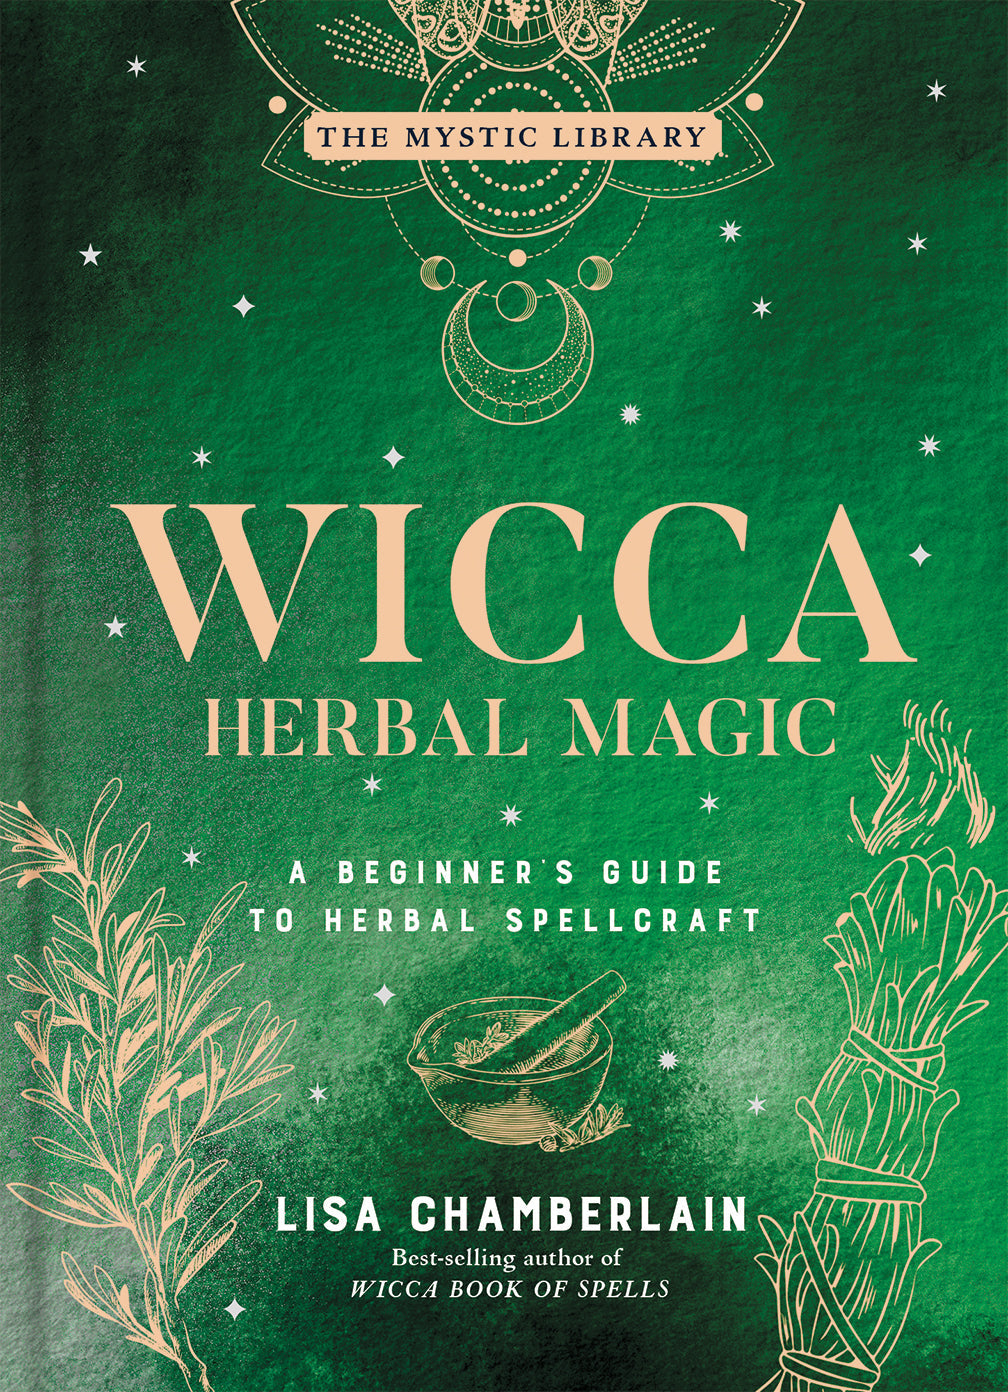 Wicca Herbal Magic: A Beginner's Guide to Herbal Spellcraft (The Mystic Library Book 5)